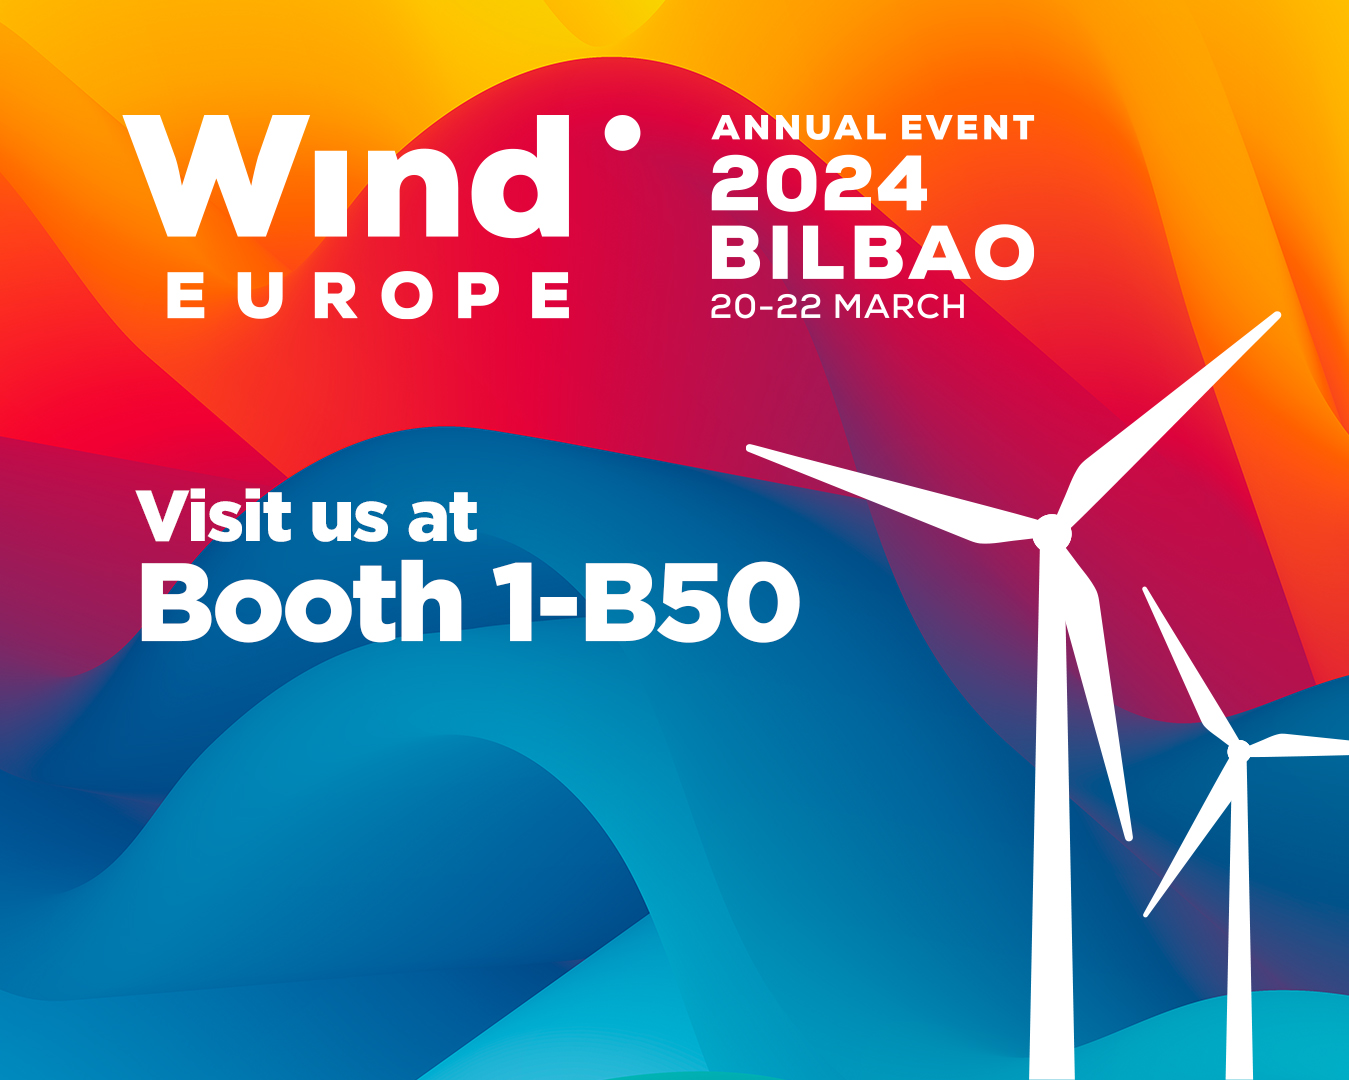 XUBI WILL ATTEND WIND EUROPE 2024 IN BILBAO FROM MARCH 20th TILL 22nd